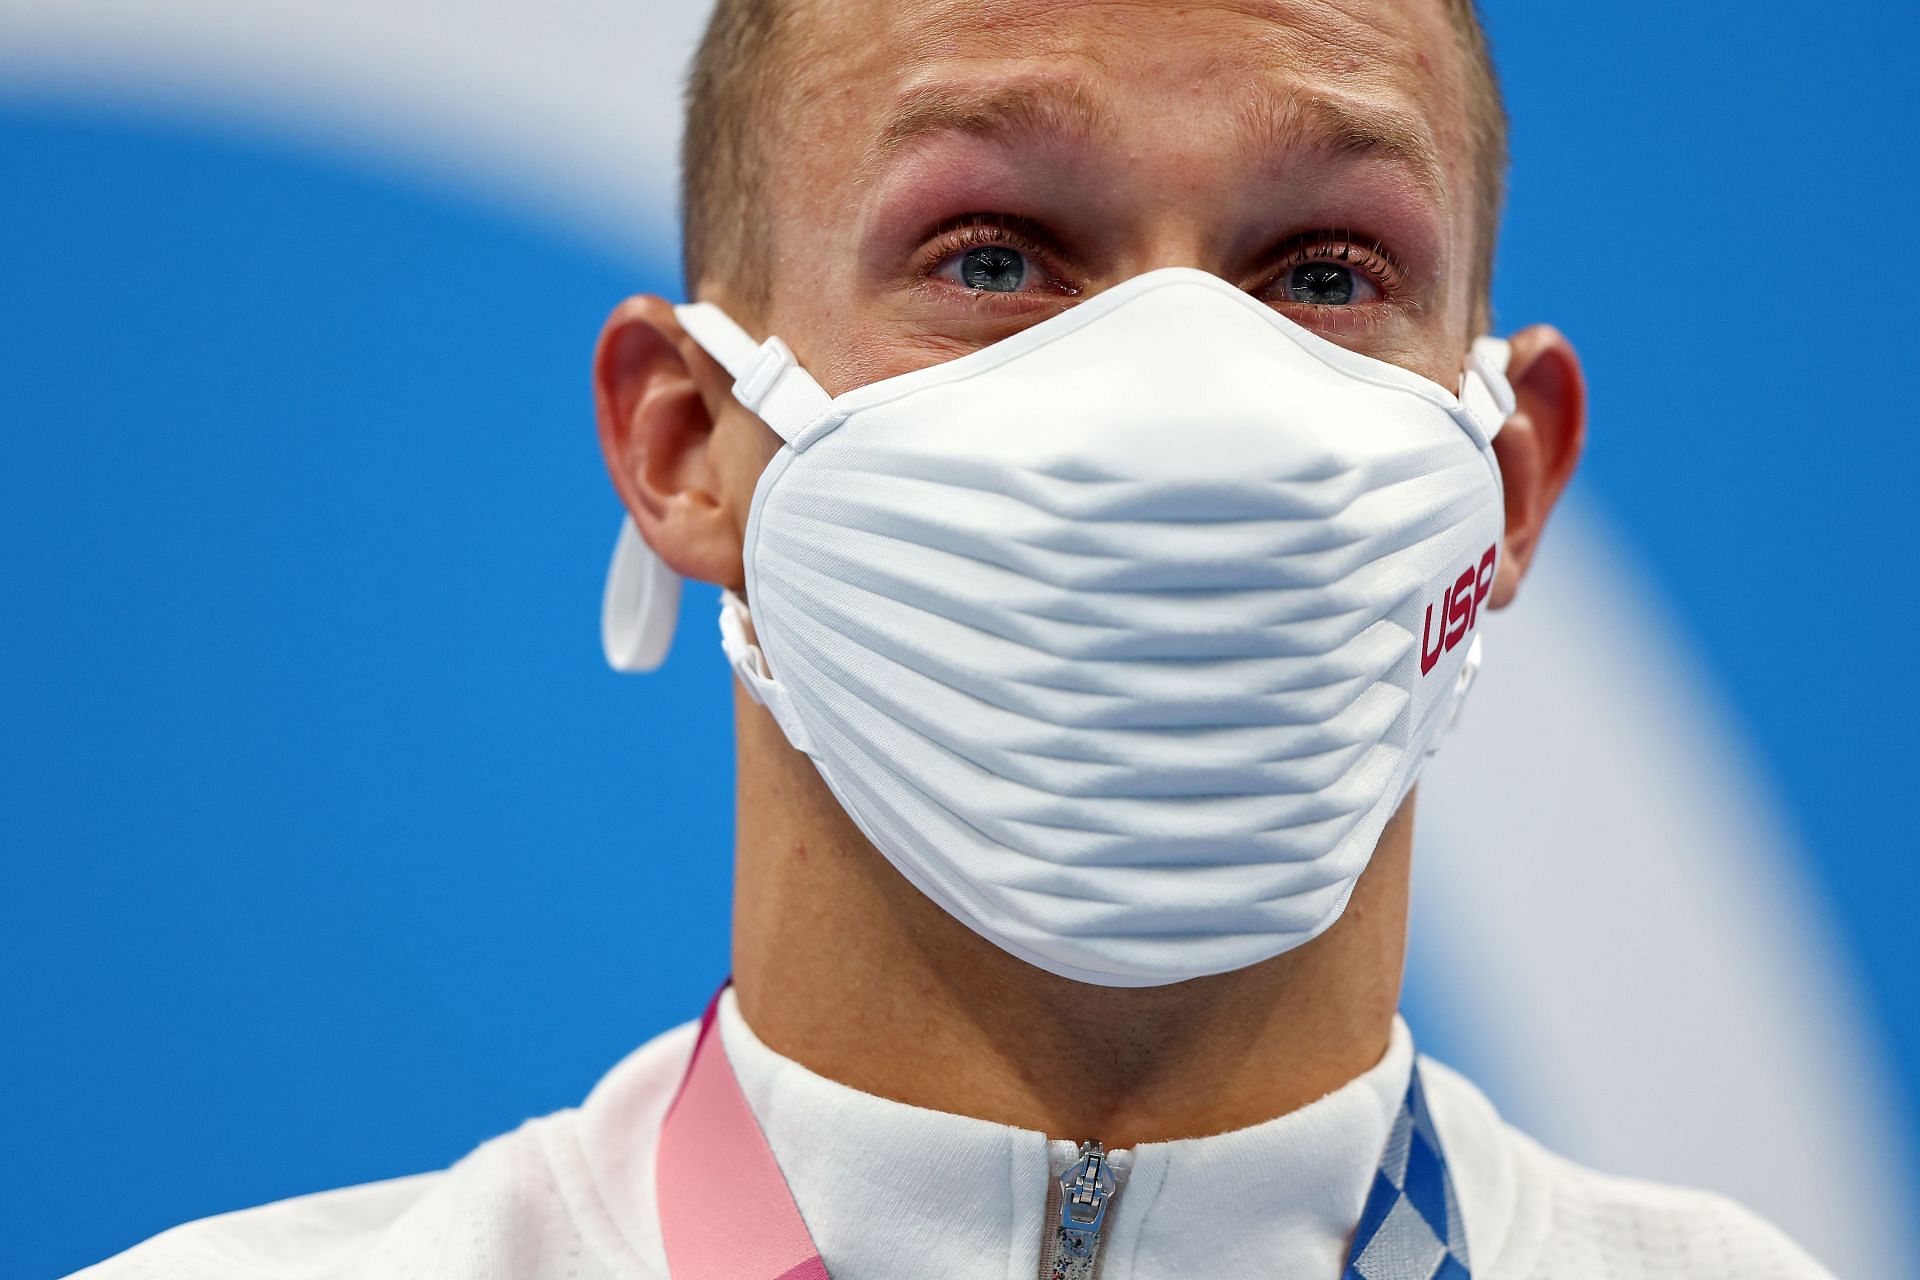 Gold medalist Caeleb Dressel of Team United States shows his emotion after receiving the gold medal for the Men&#039;s 100m Freestyle Final on day six of the Tokyo 2020 Olympic Games at Tokyo Aquatics Centre on July 29, 2021 in Tokyo, Japan. (Photo by Tom Pennington/Getty Images)